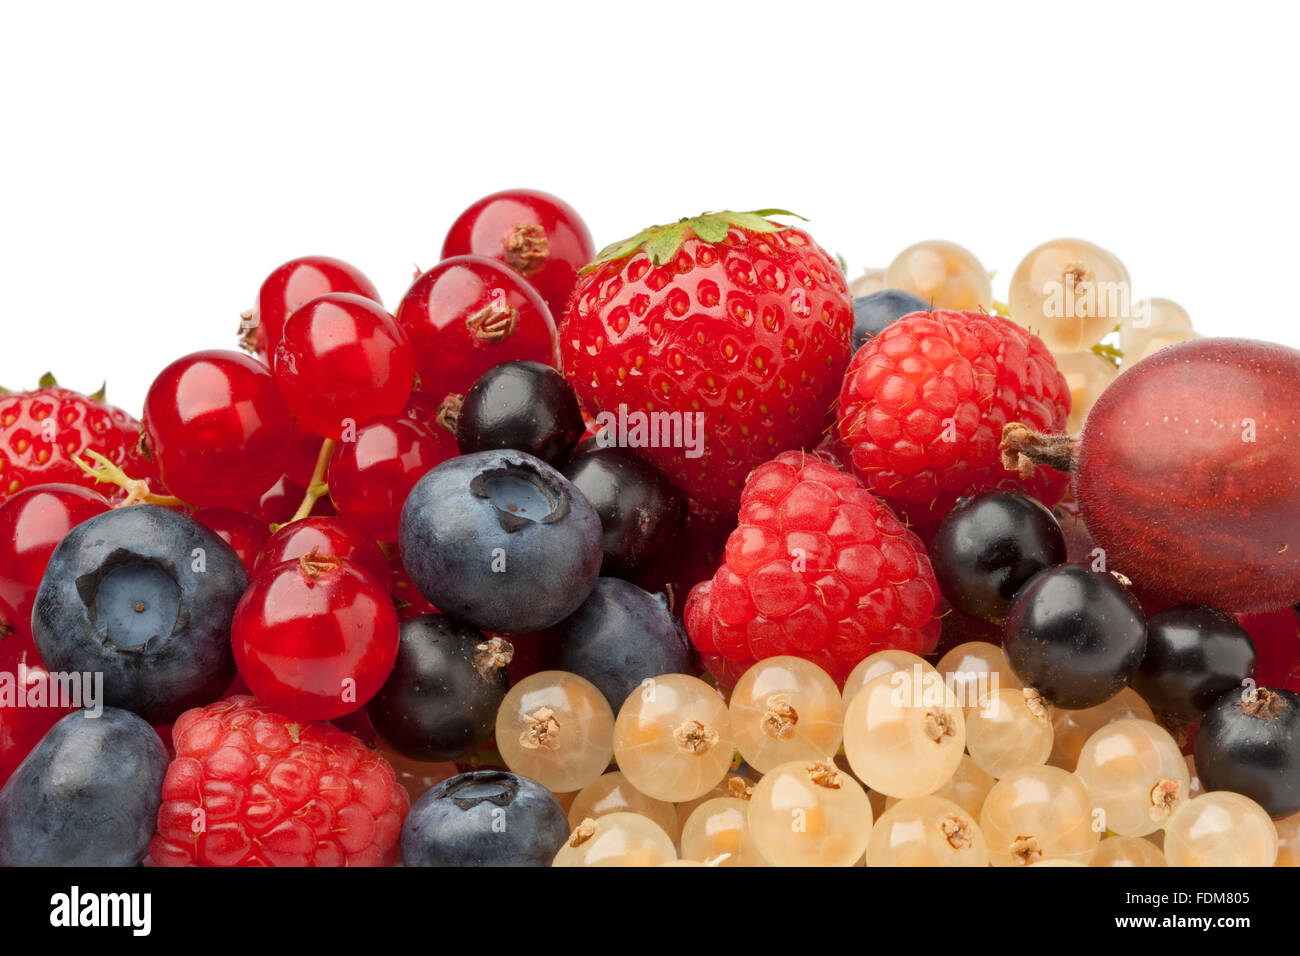 Composition of summer berries on white background Stock Photo